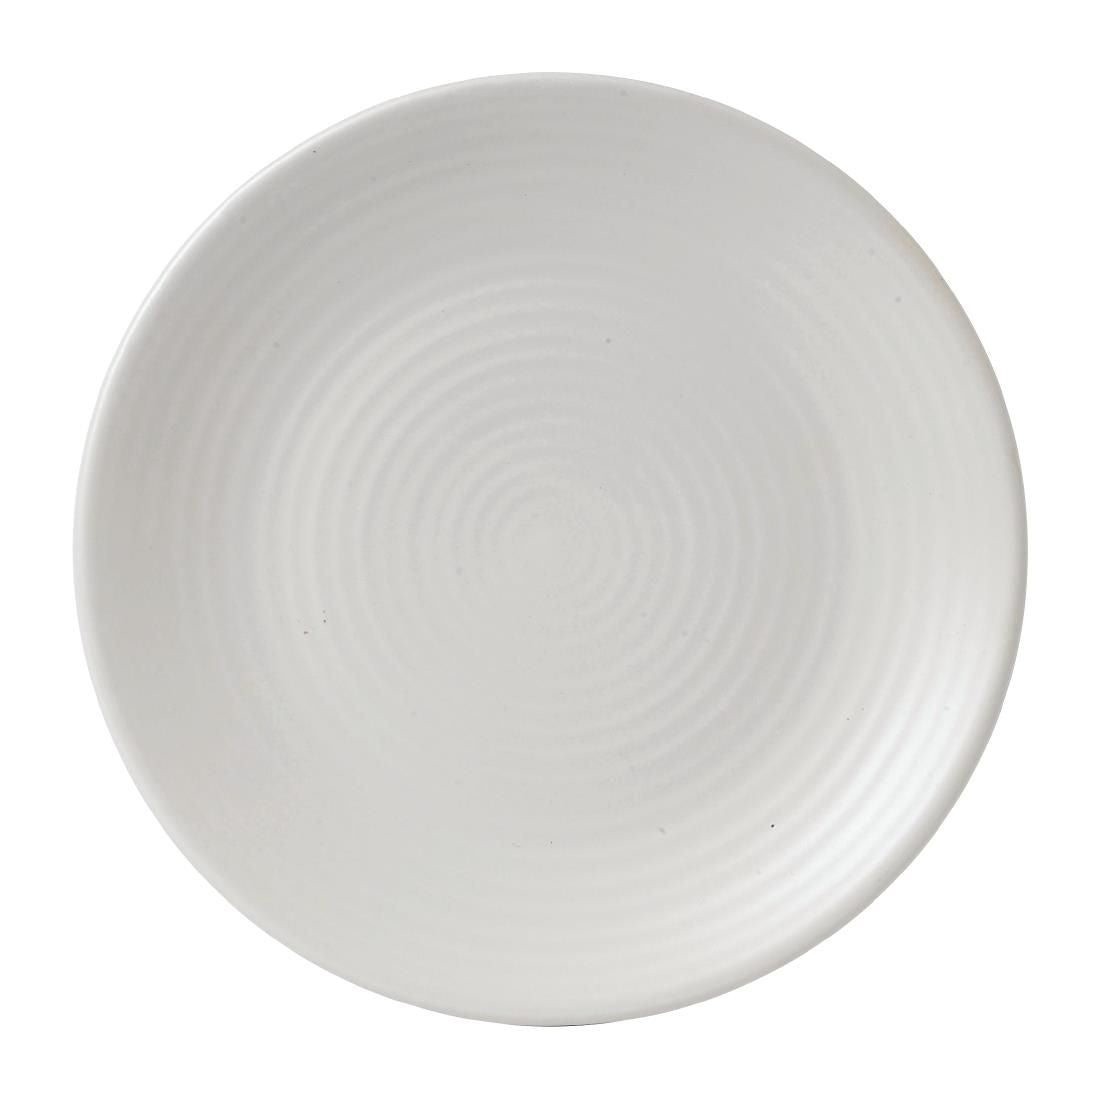 FE338 Dudson Evo Pearl Coupe Plate 228mm (Pack of 6) JD Catering Equipment Solutions Ltd